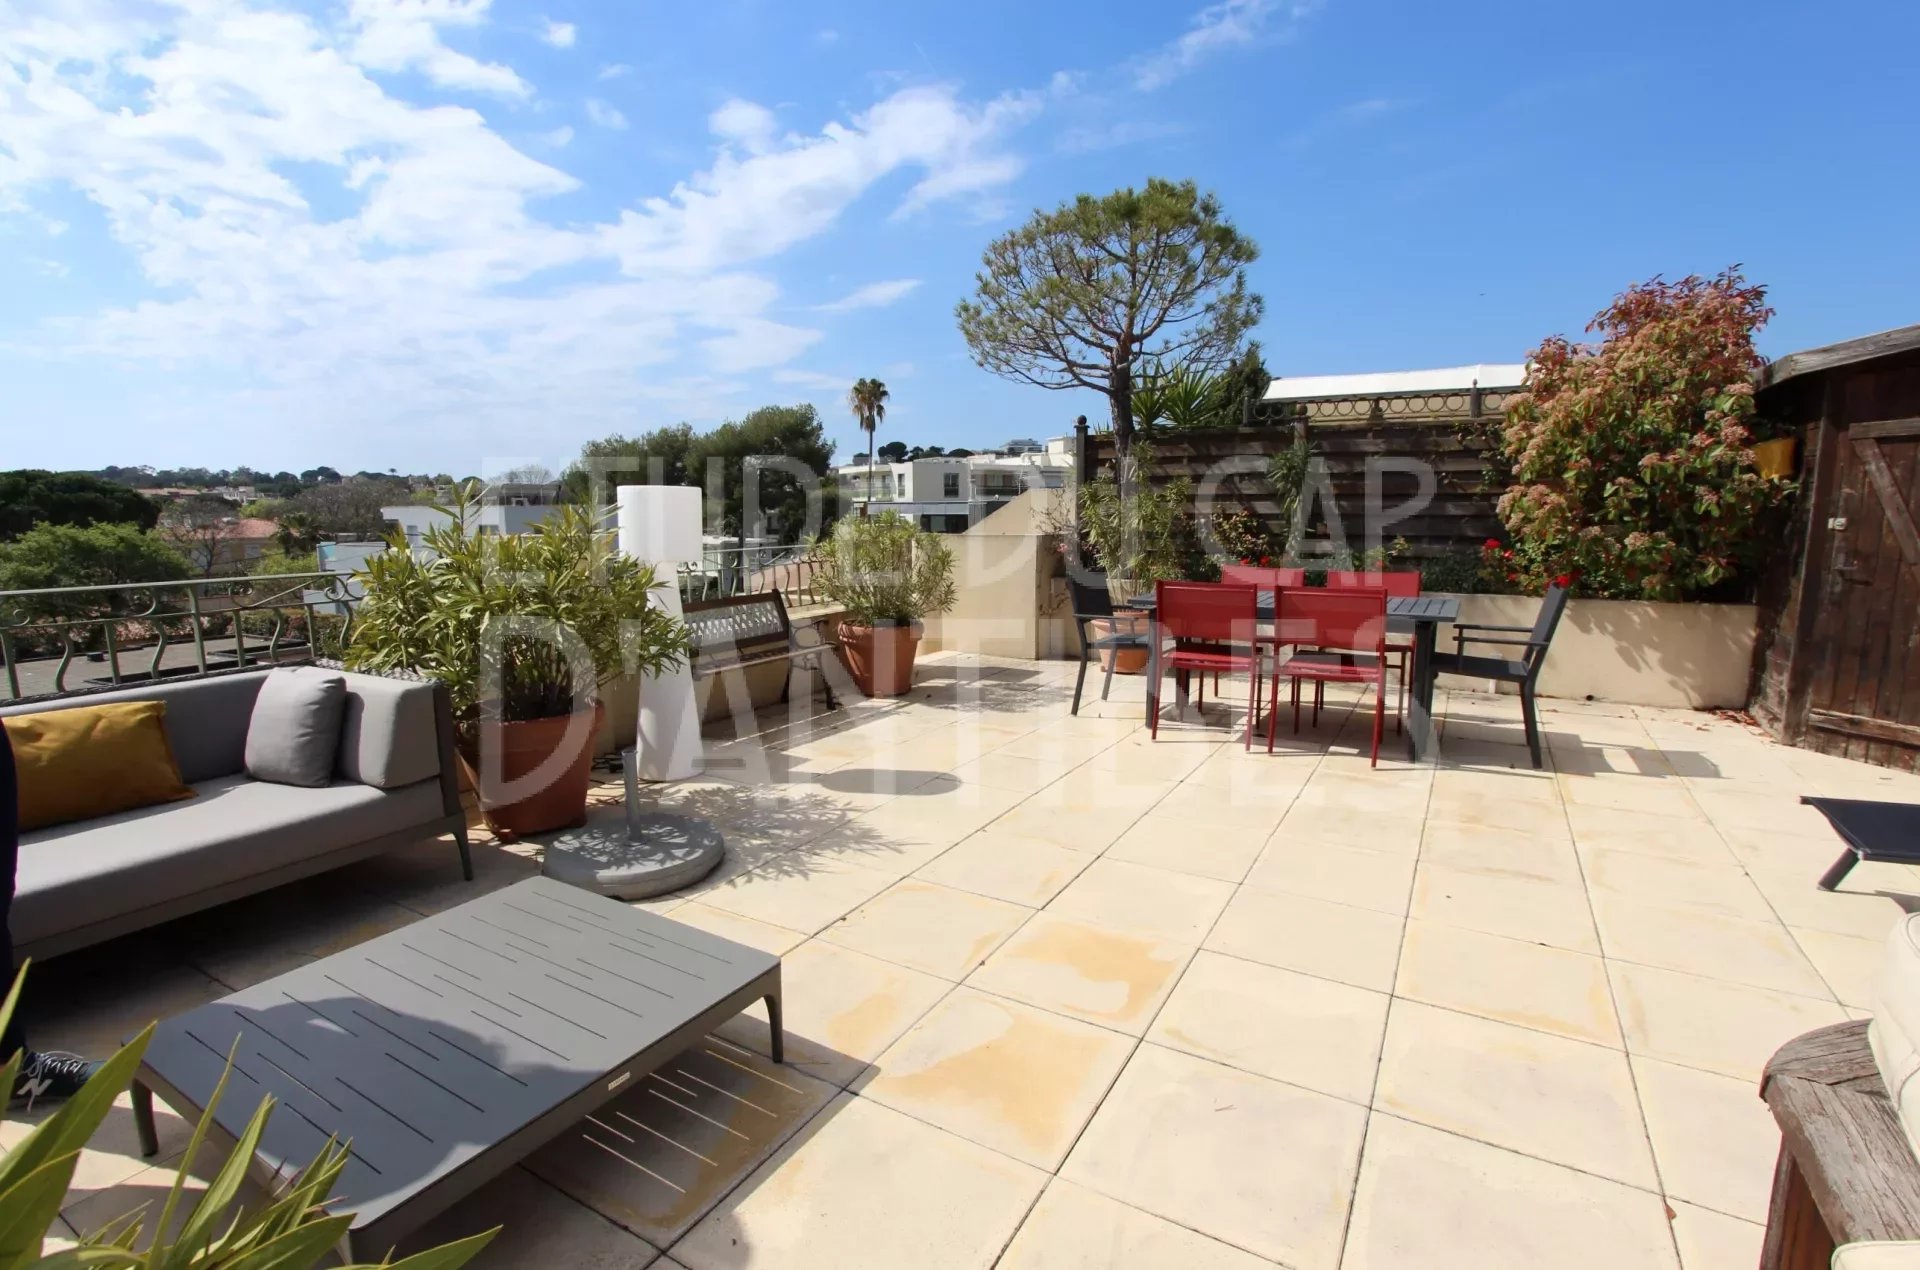 Apartment to rent in summer - Antibes / Ilette